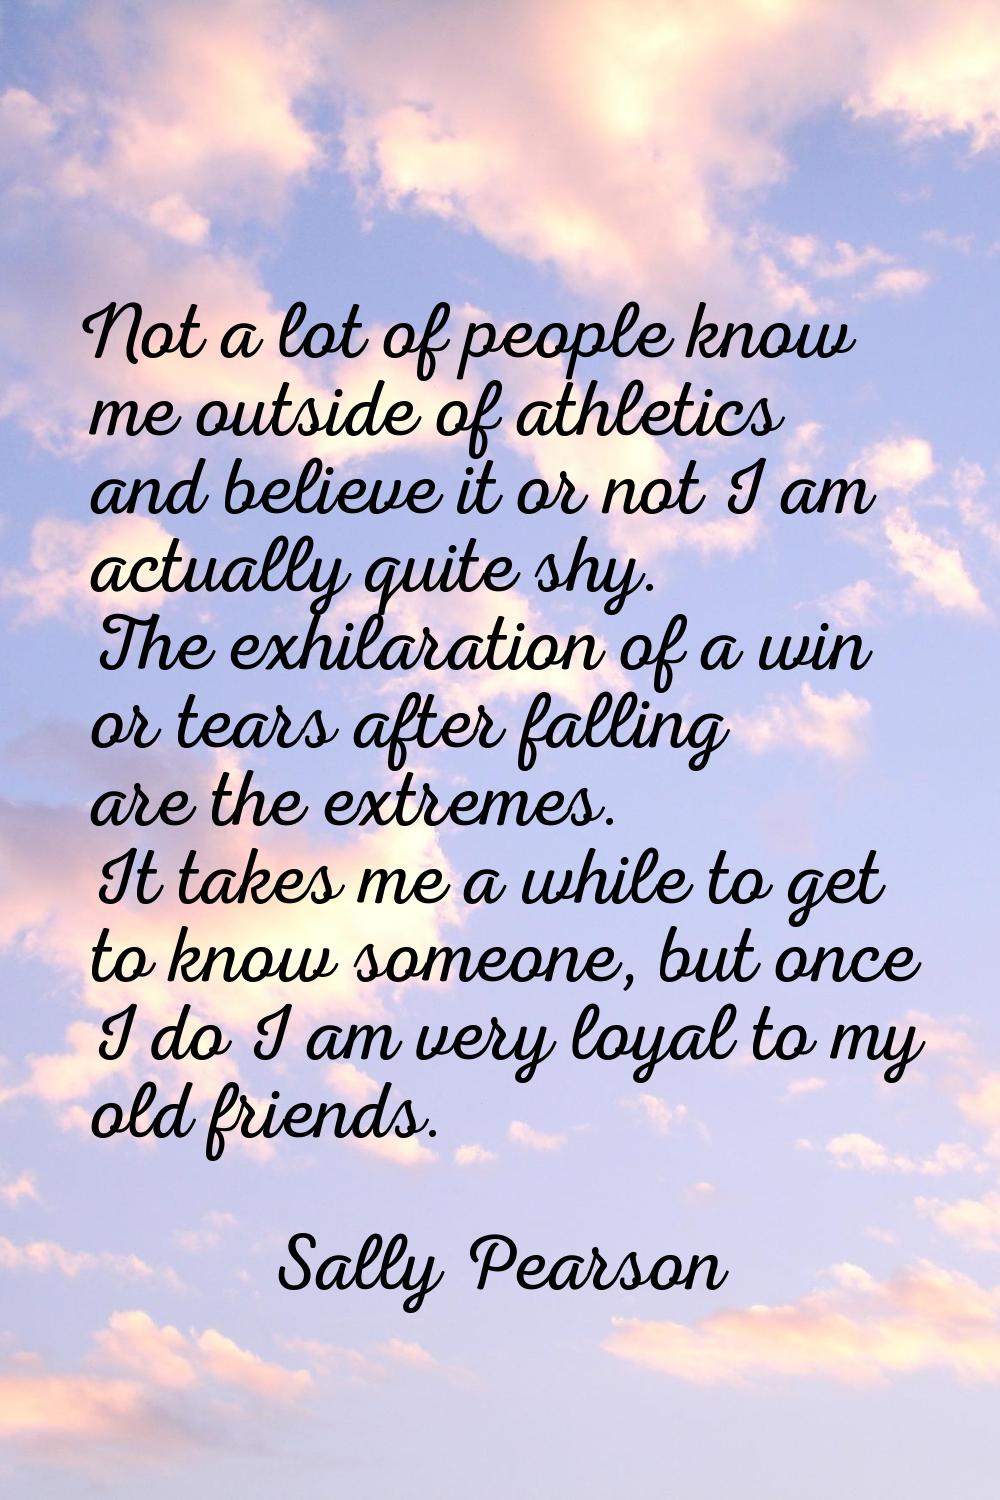 Not a lot of people know me outside of athletics and believe it or not I am actually quite shy. The